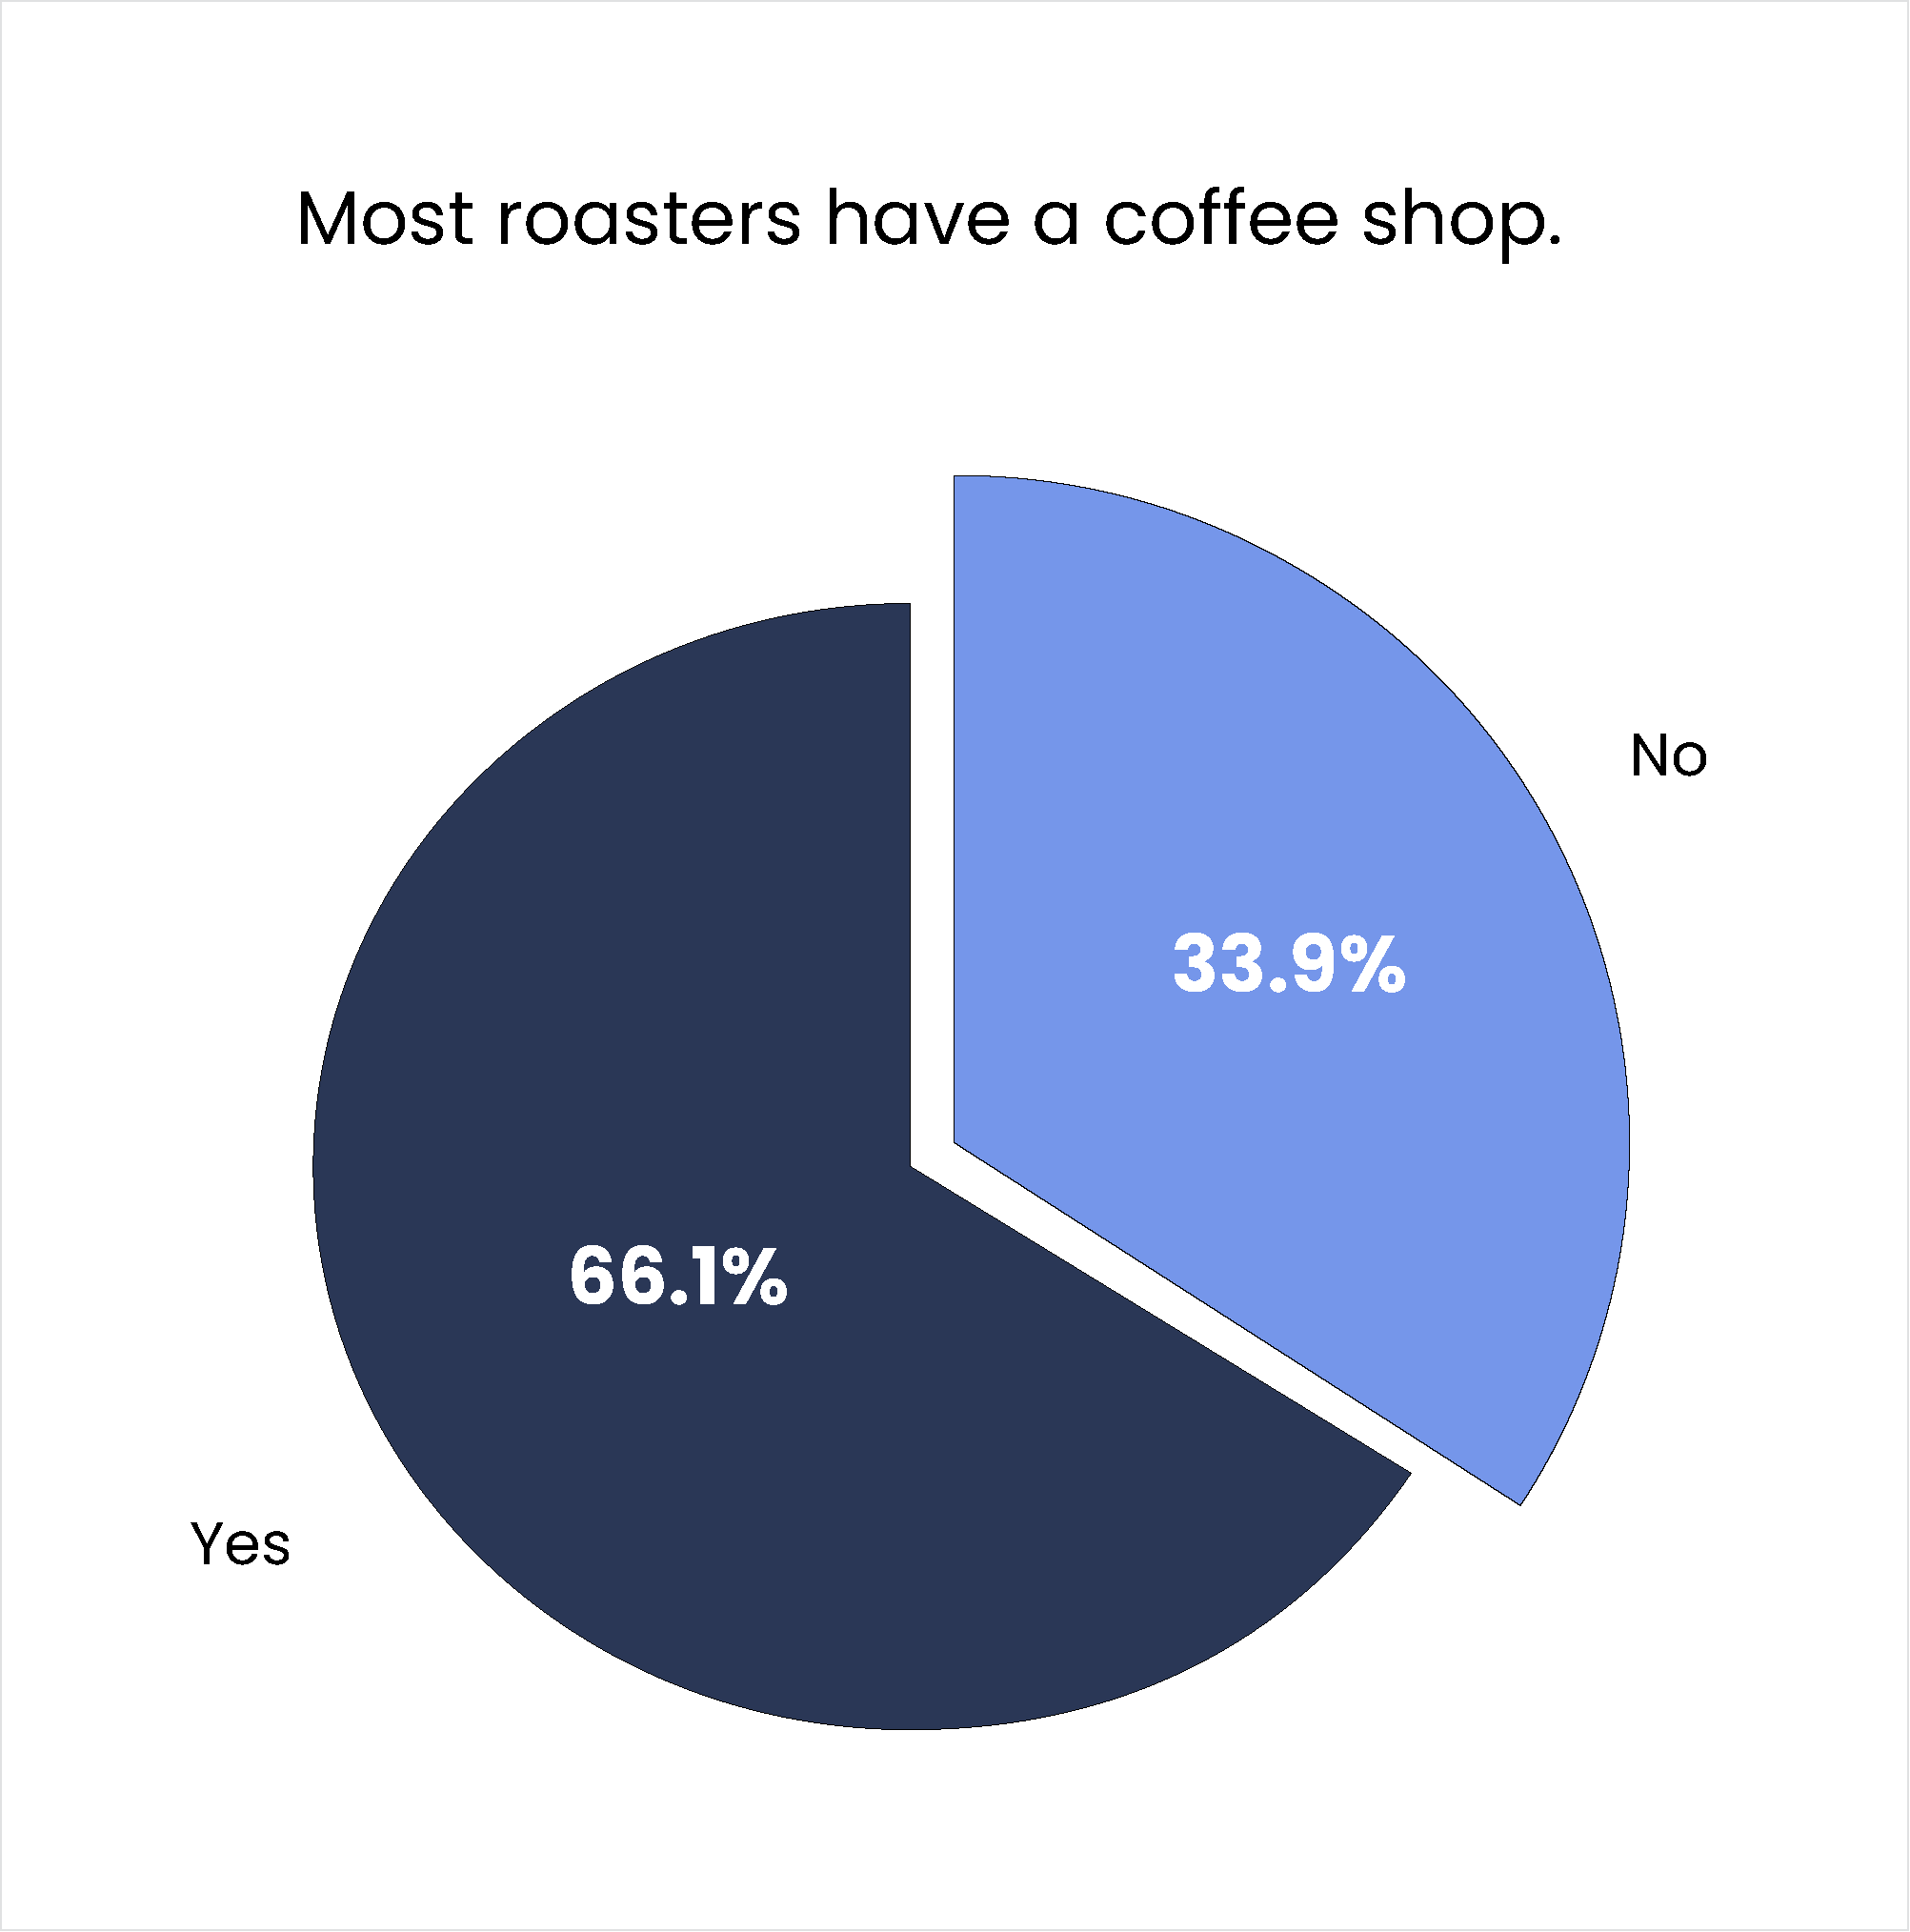 Most roasters have a coffee shop